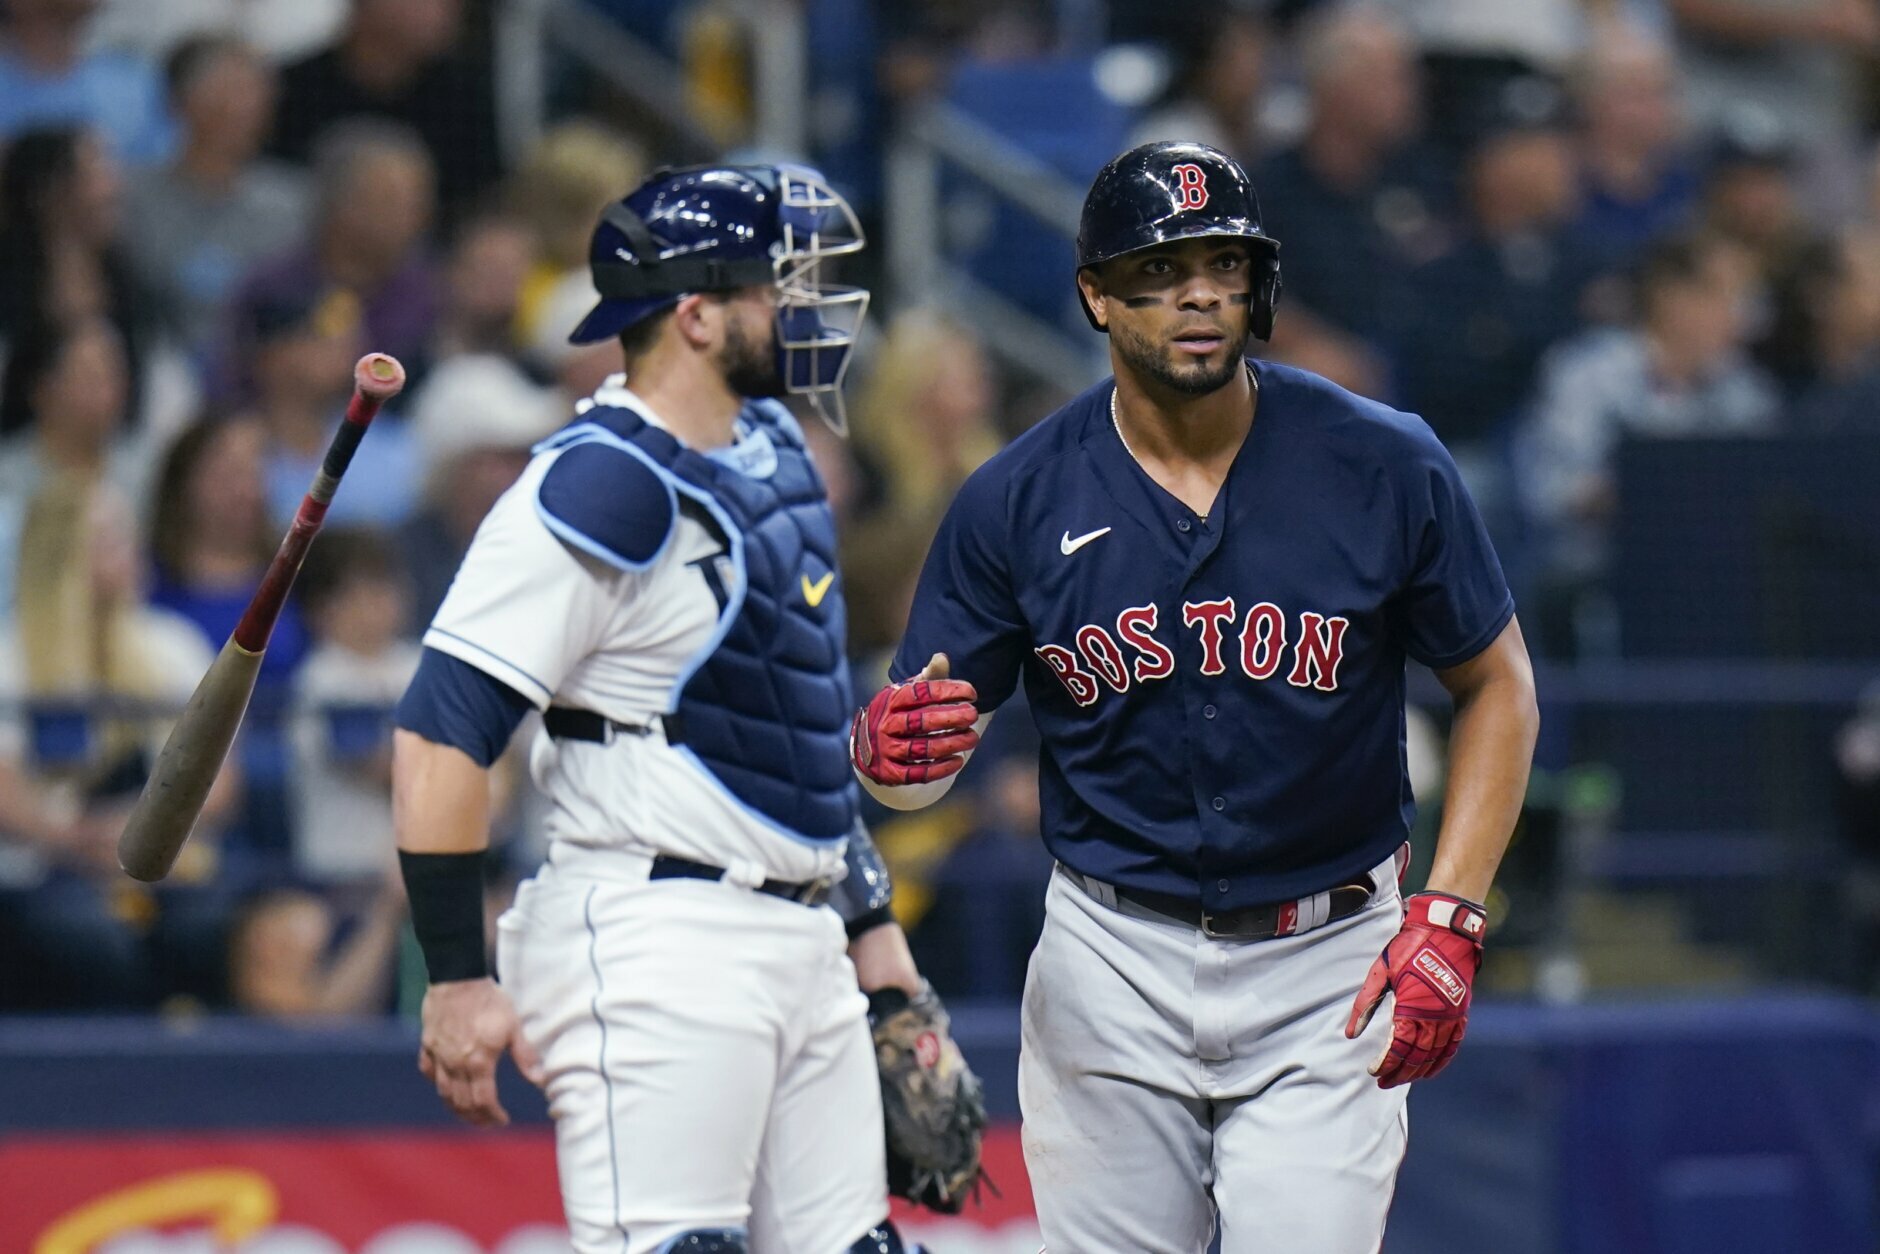 Boston Red Sox's Xander Bogaerts is congratulated after his solo